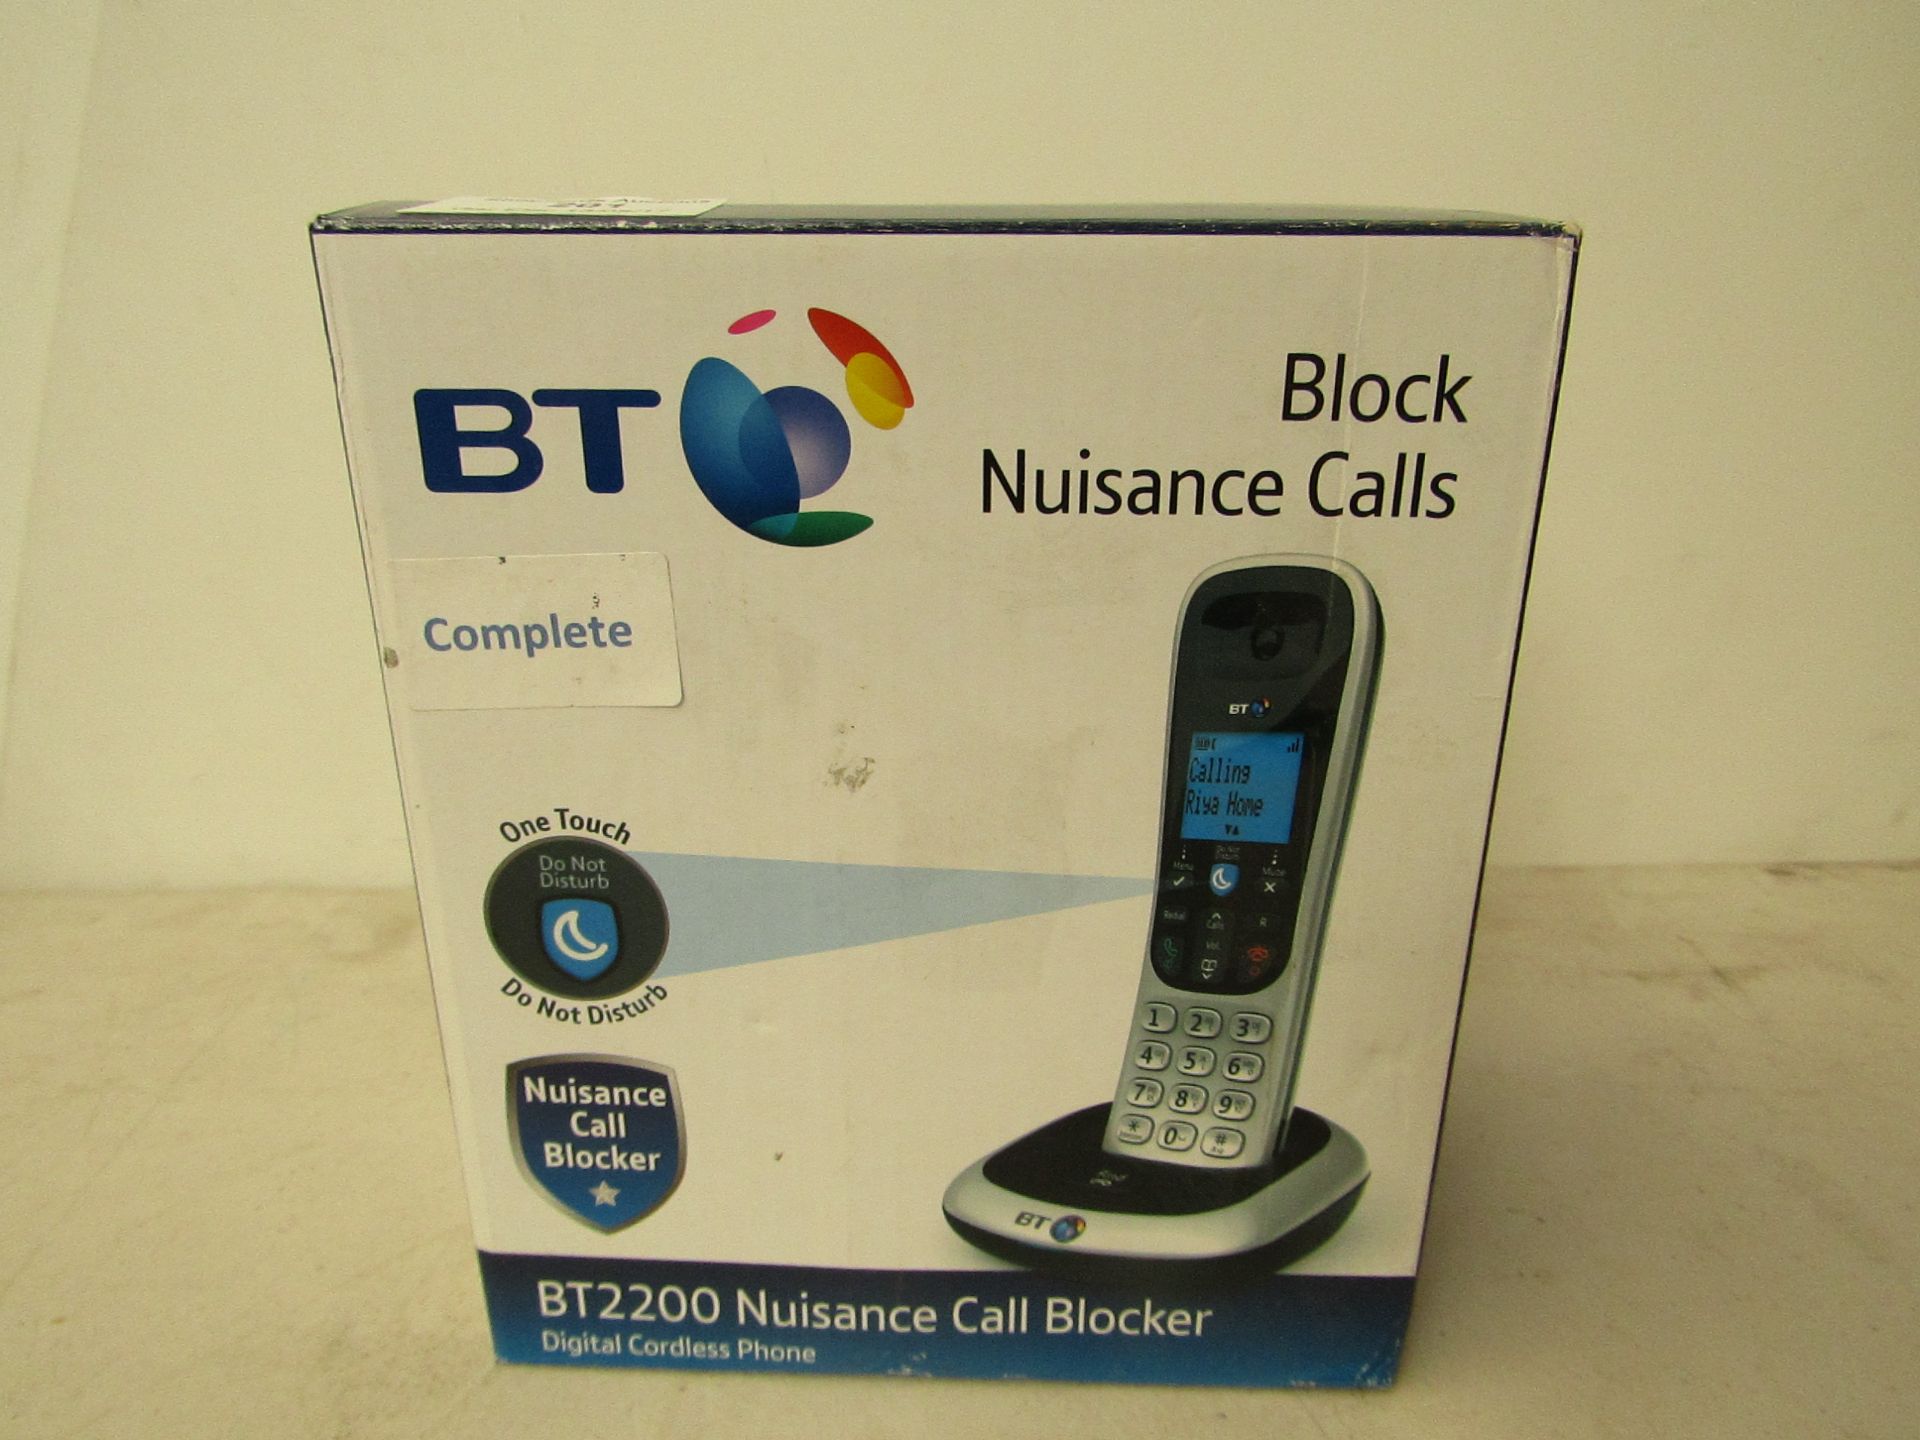 BT BT2200 advanced nuisance call blocker digital cordless phone, complete but untested and boxed.